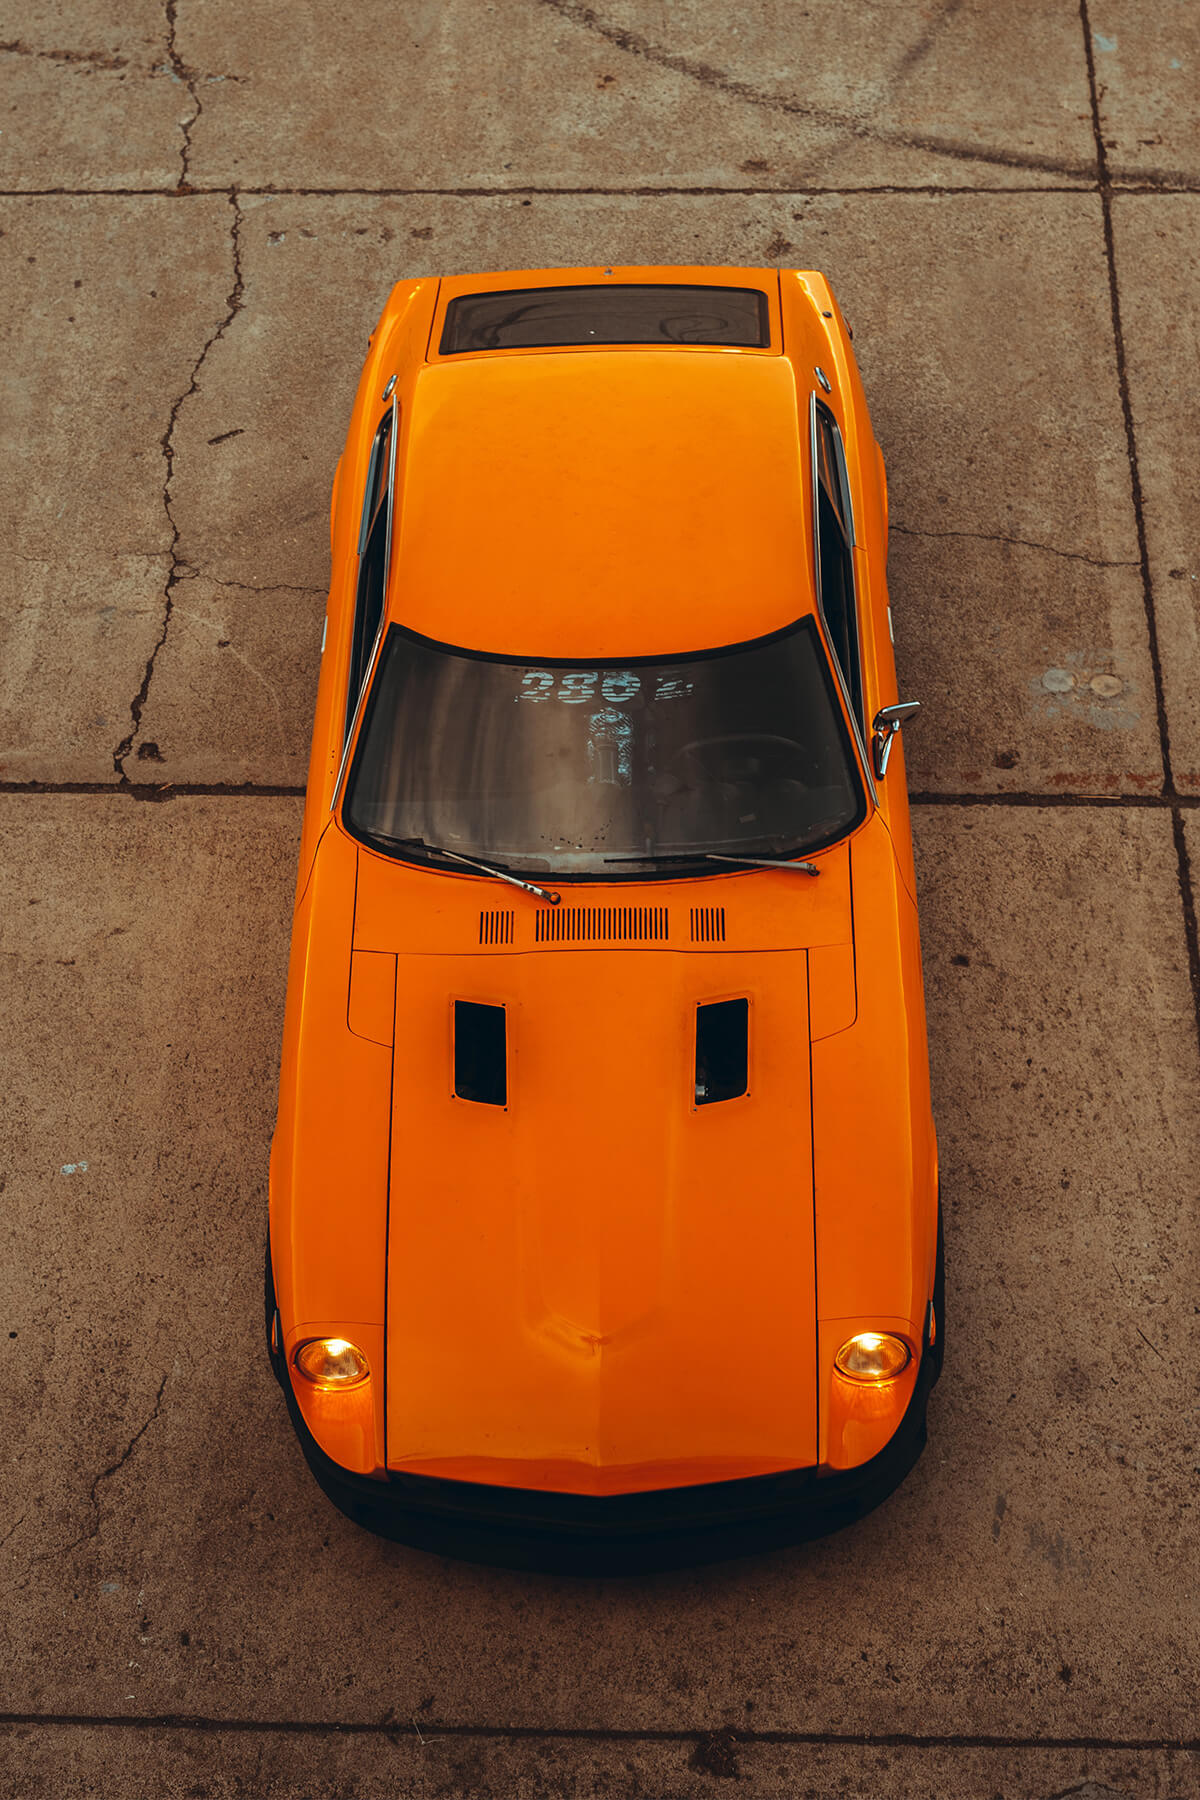 Period-Correct 1974 Datsun 240Z 2+2 GS30 - Iconic Japanese Sports 